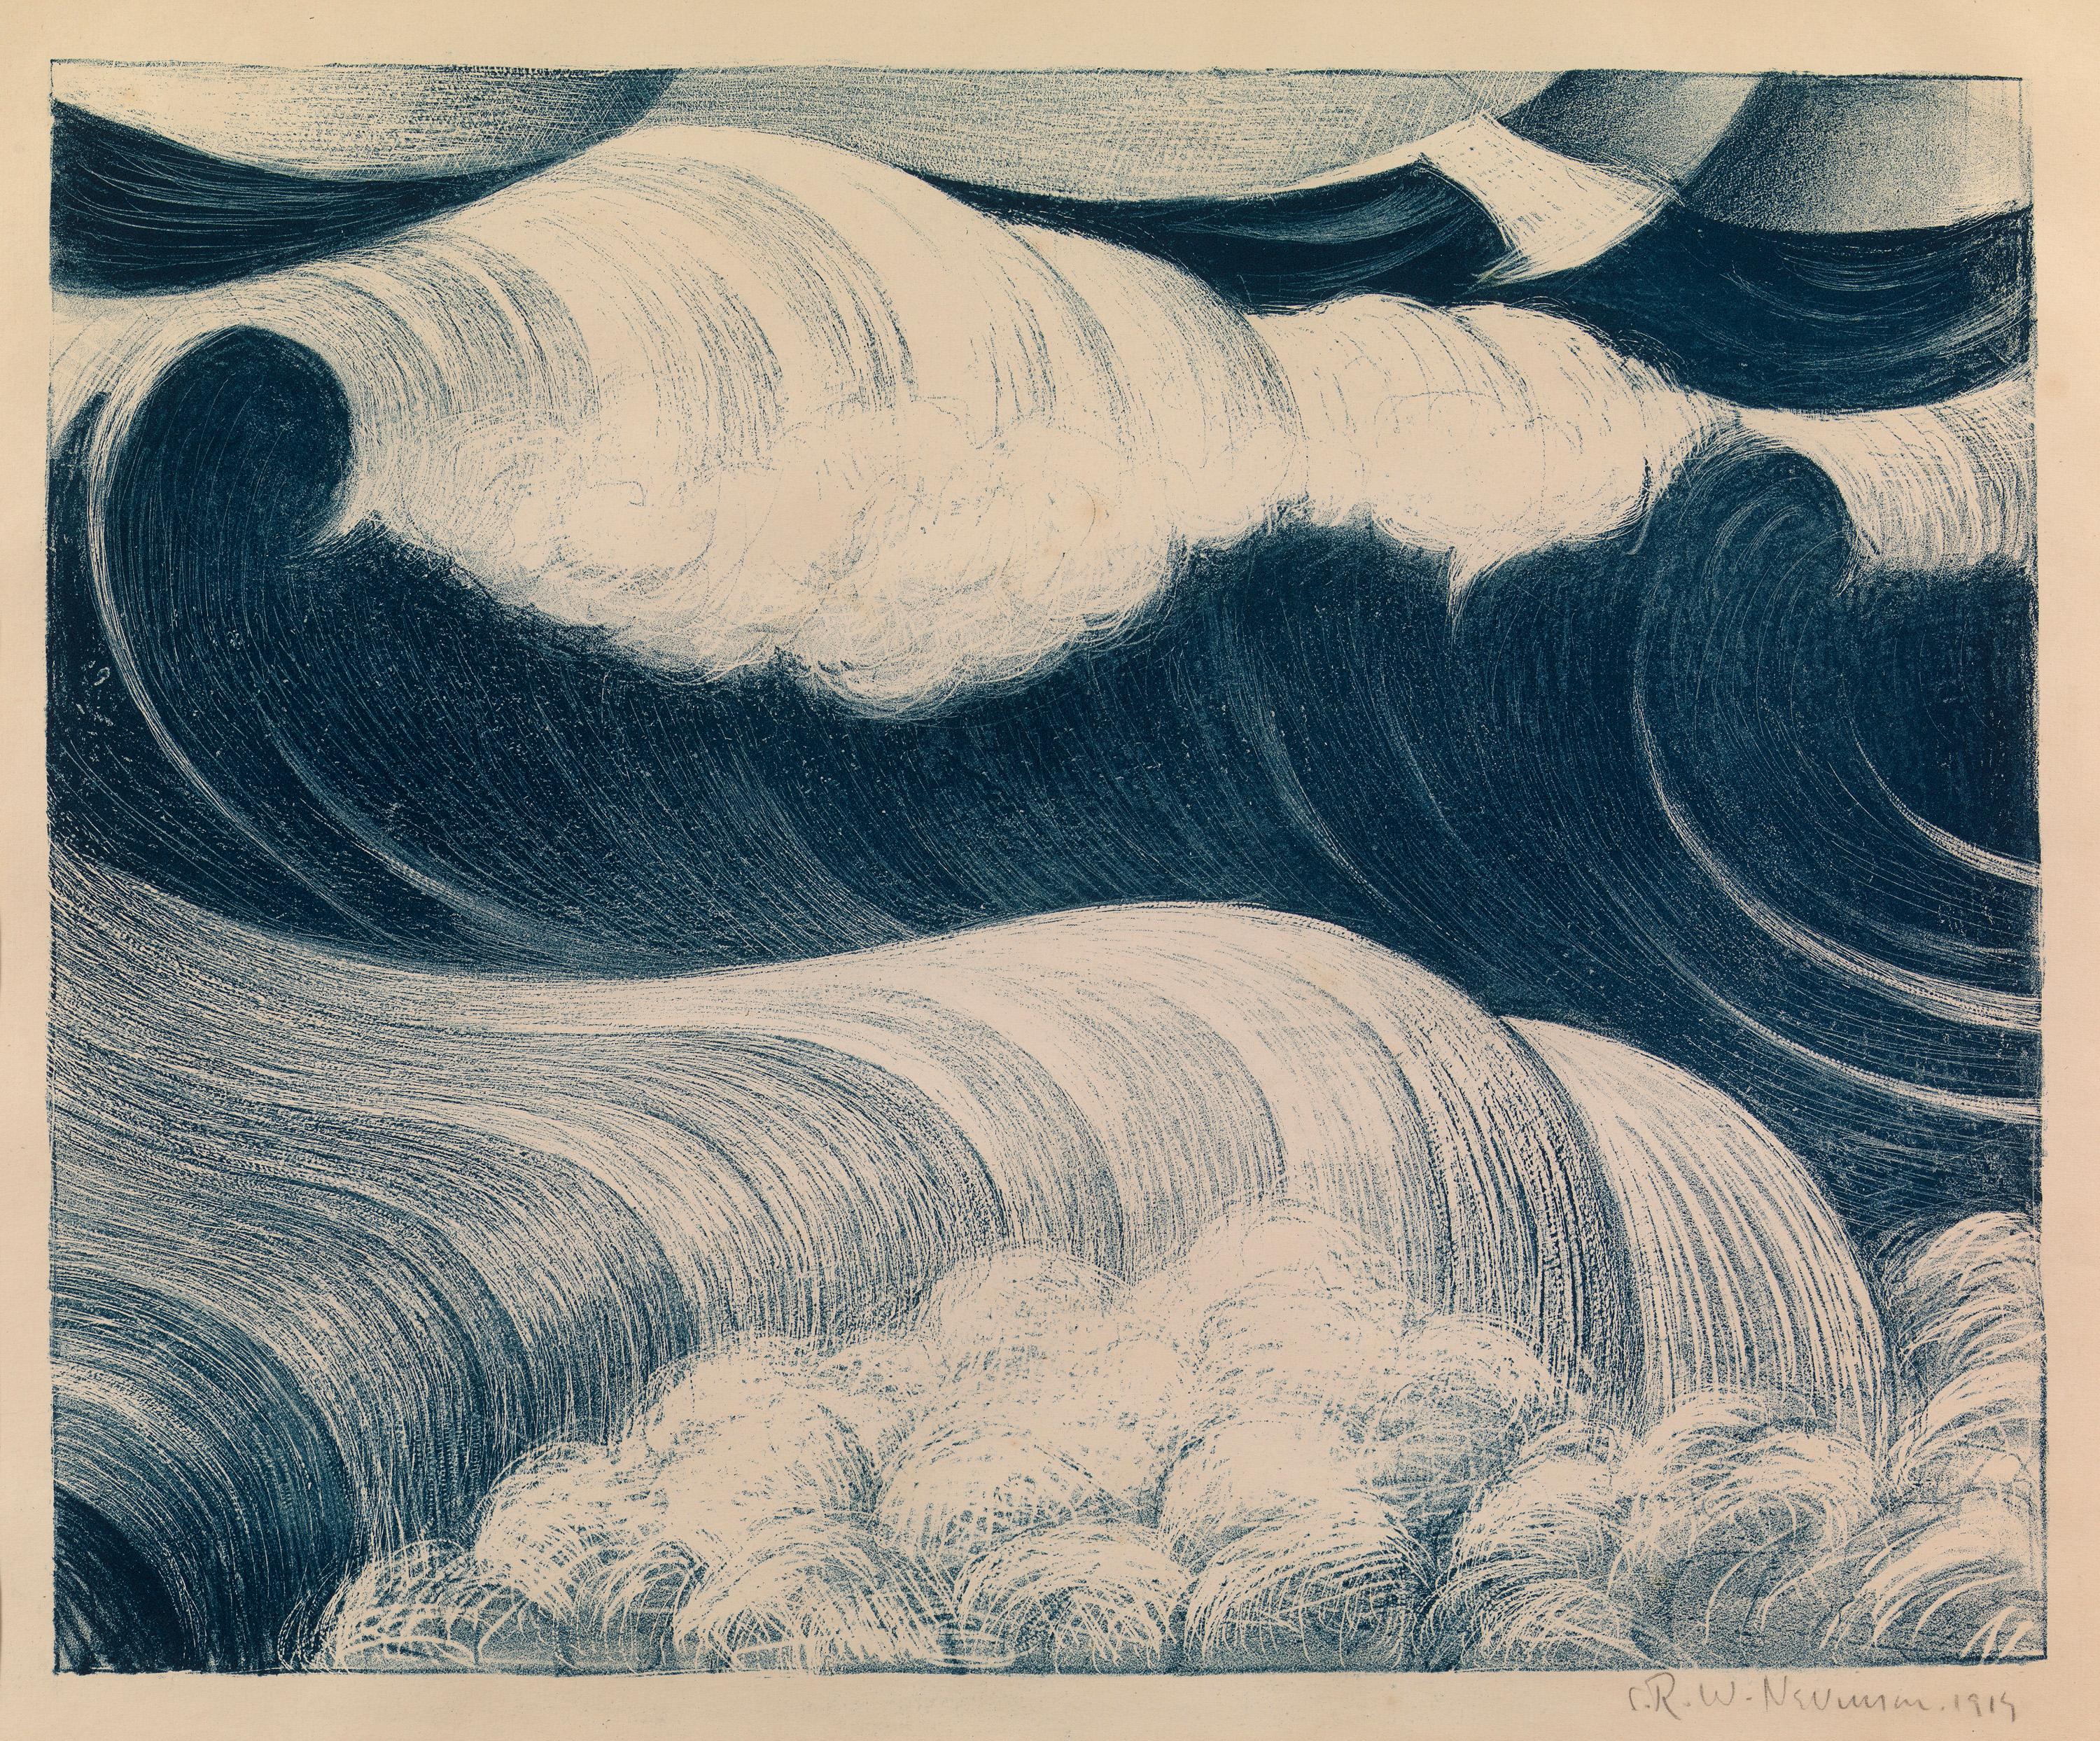 Christopher R. W. Nevinson Landscape Print - The Blue Wave - 20th Century, Lithograph by Christopher Nevinson